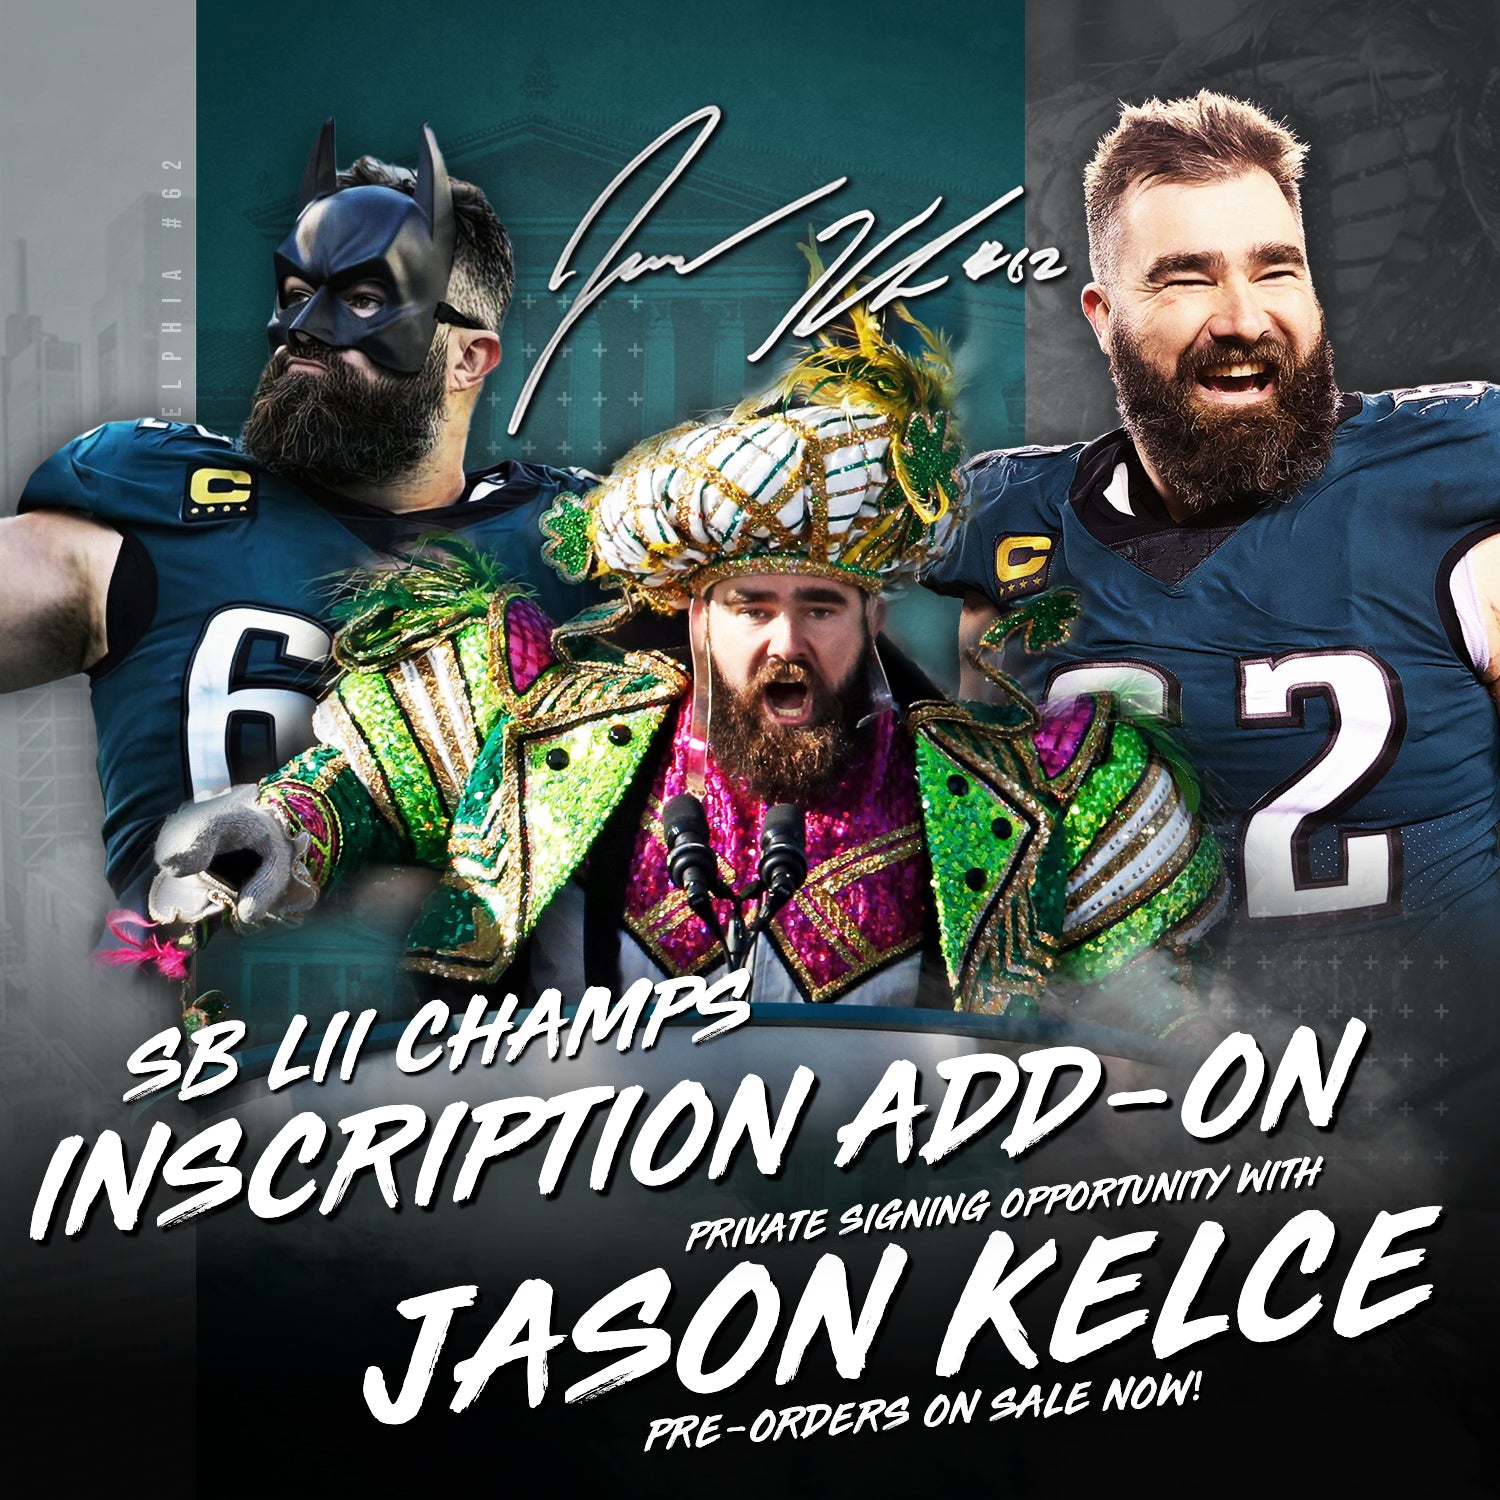 Jason Kelce Autograph Signing Inscription Add-On (Your Item) - Dynasty Sports & Framing 